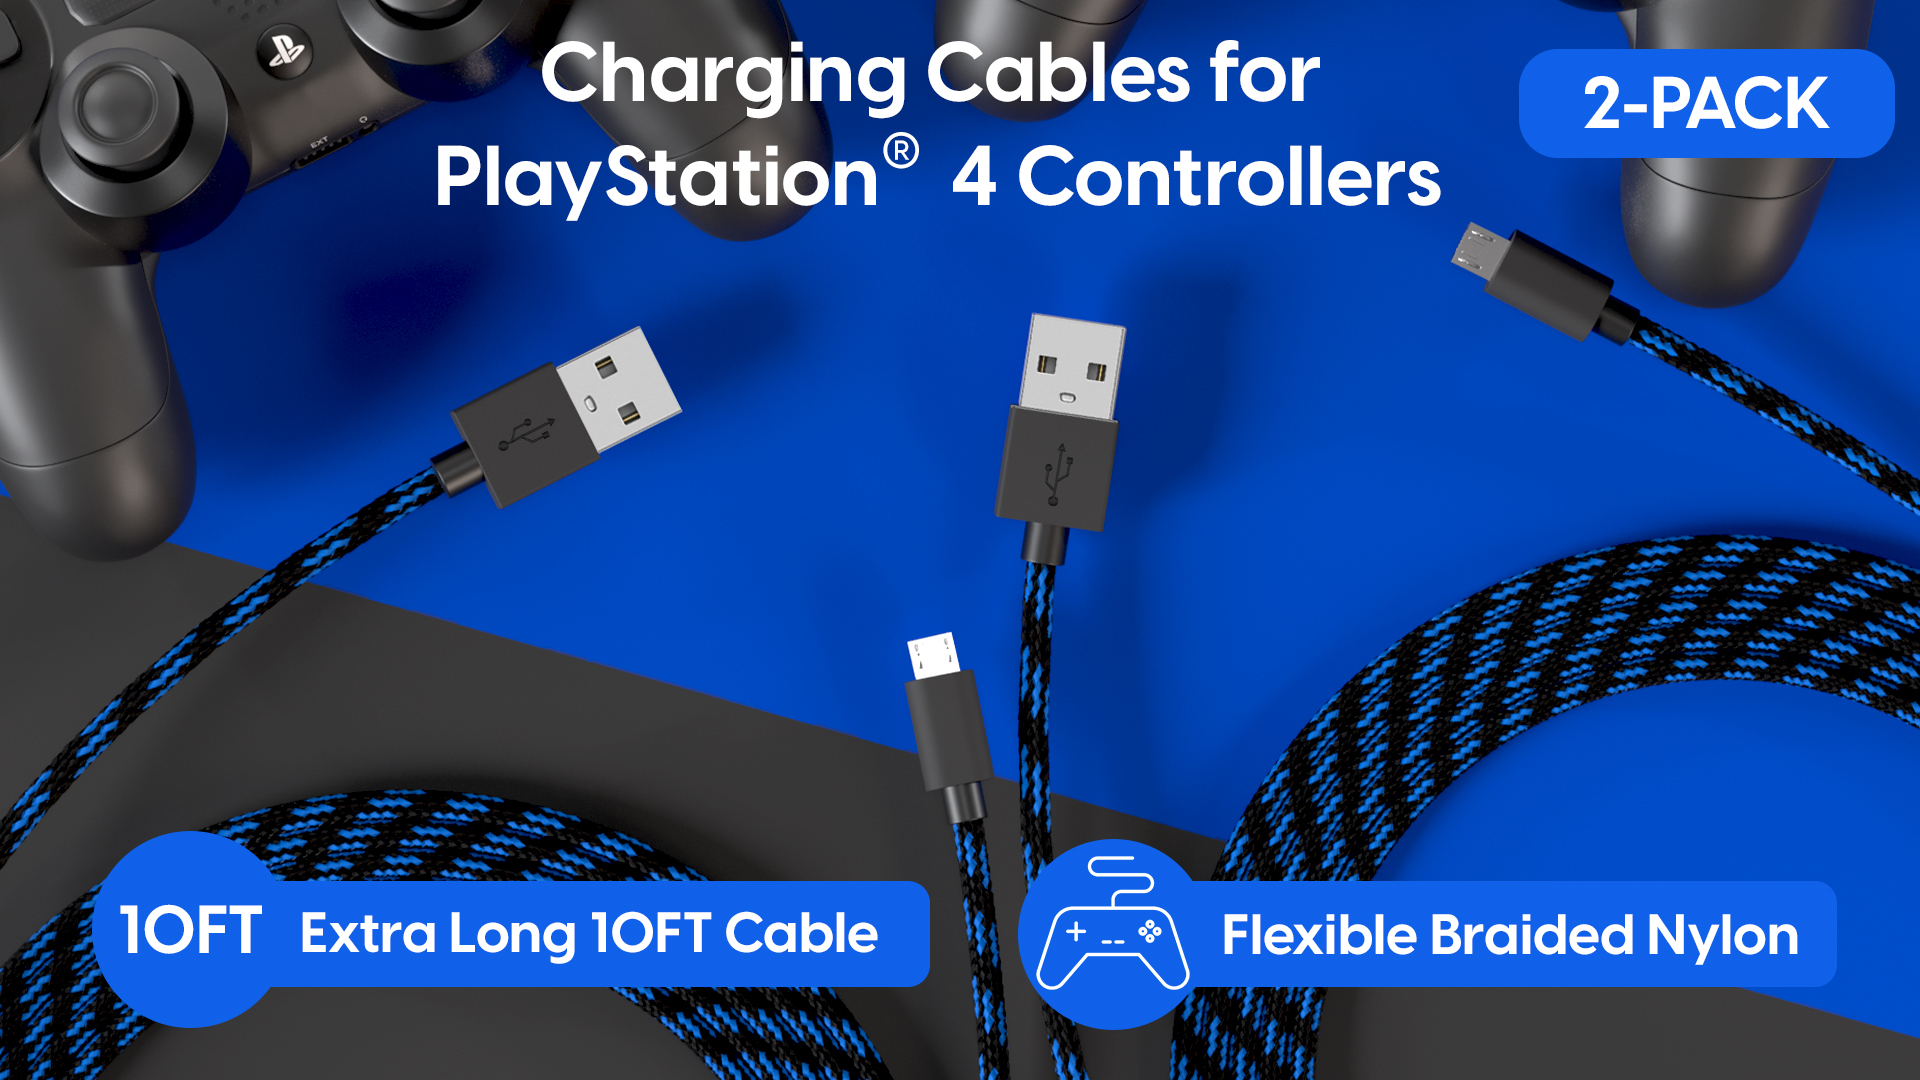 TALK WORKS Long Controller Charging Cable for Playstation 4-10-Foot Long  Braided Micro USB Cord Charger Cord for PS4 Controller - Blue-Black, 2 Pack